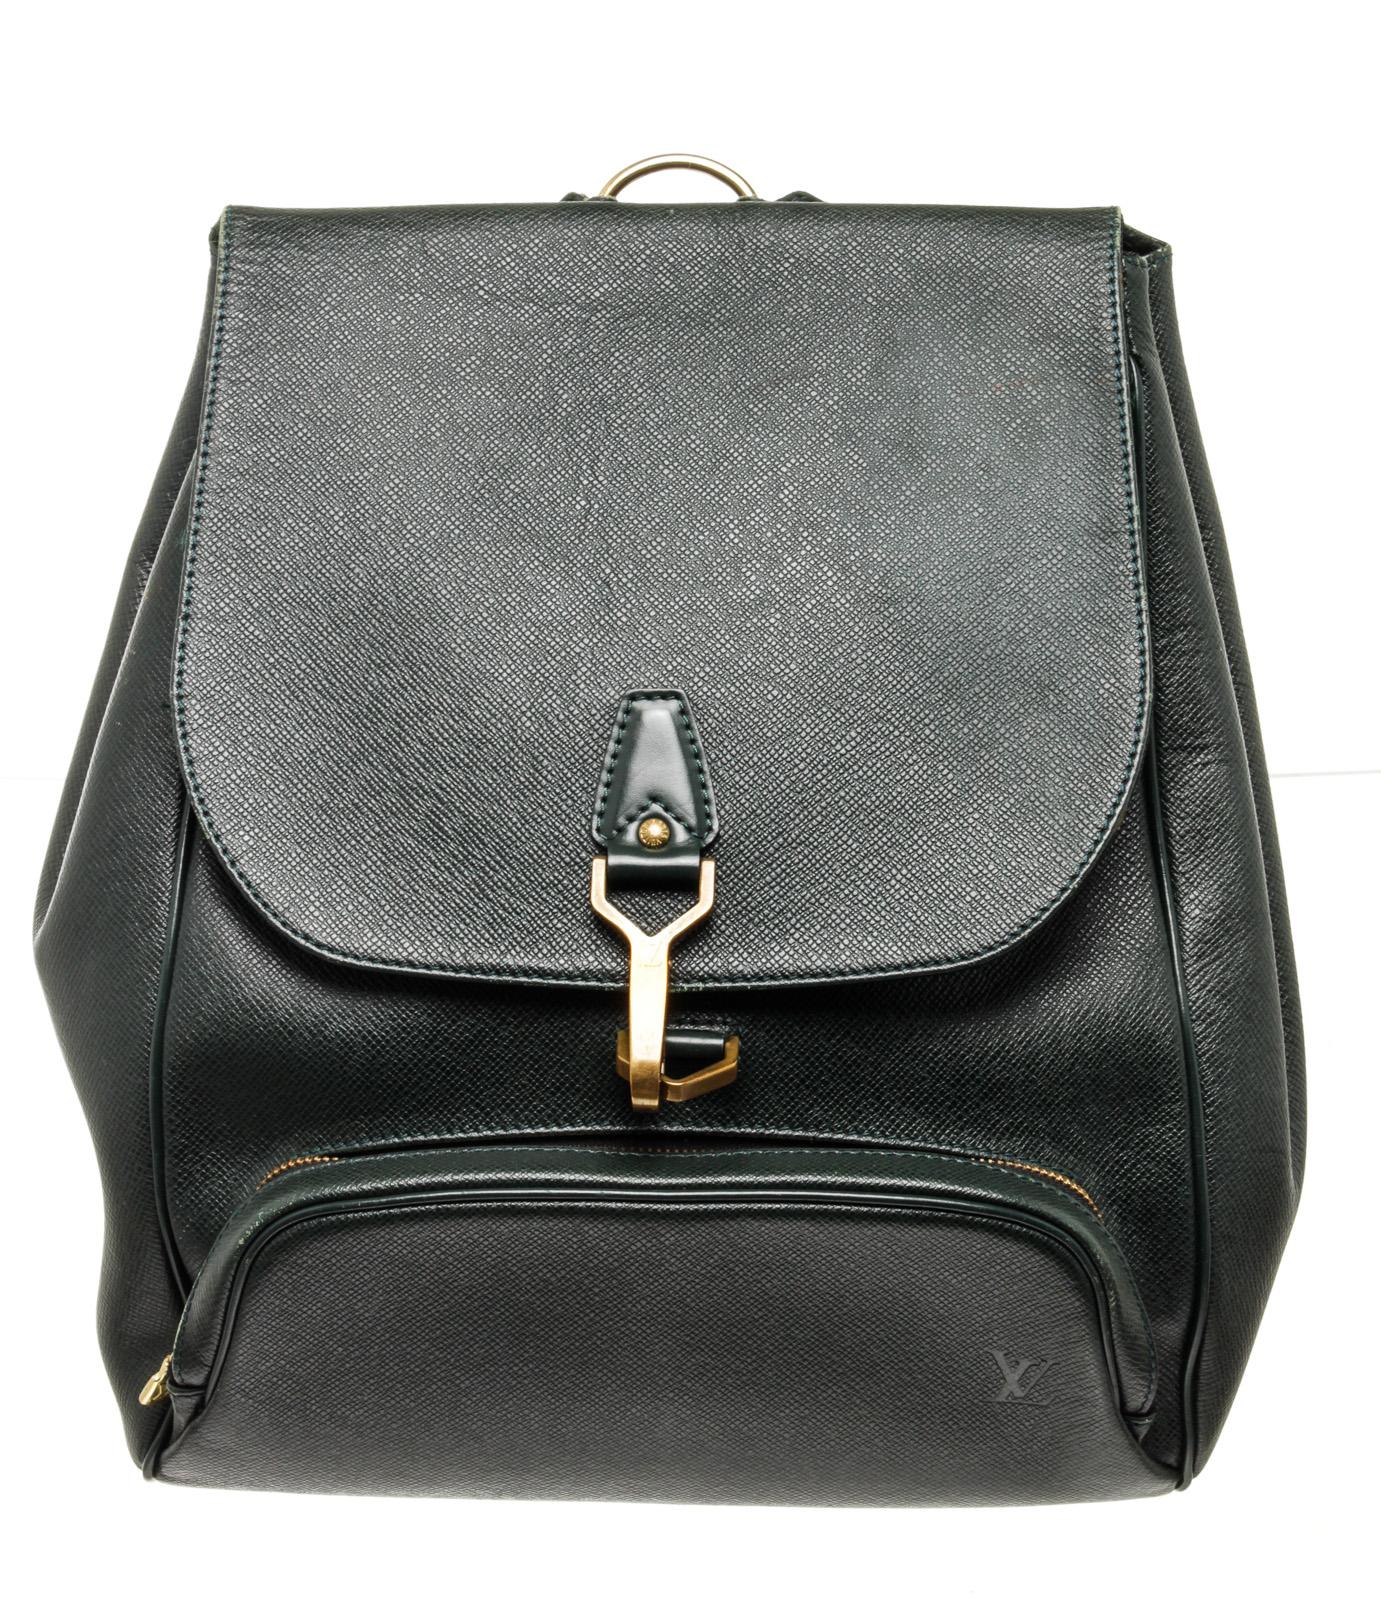 Louis Vuitton Black Leather Cassia Briefcase Bag In Good Condition For Sale In Irvine, CA